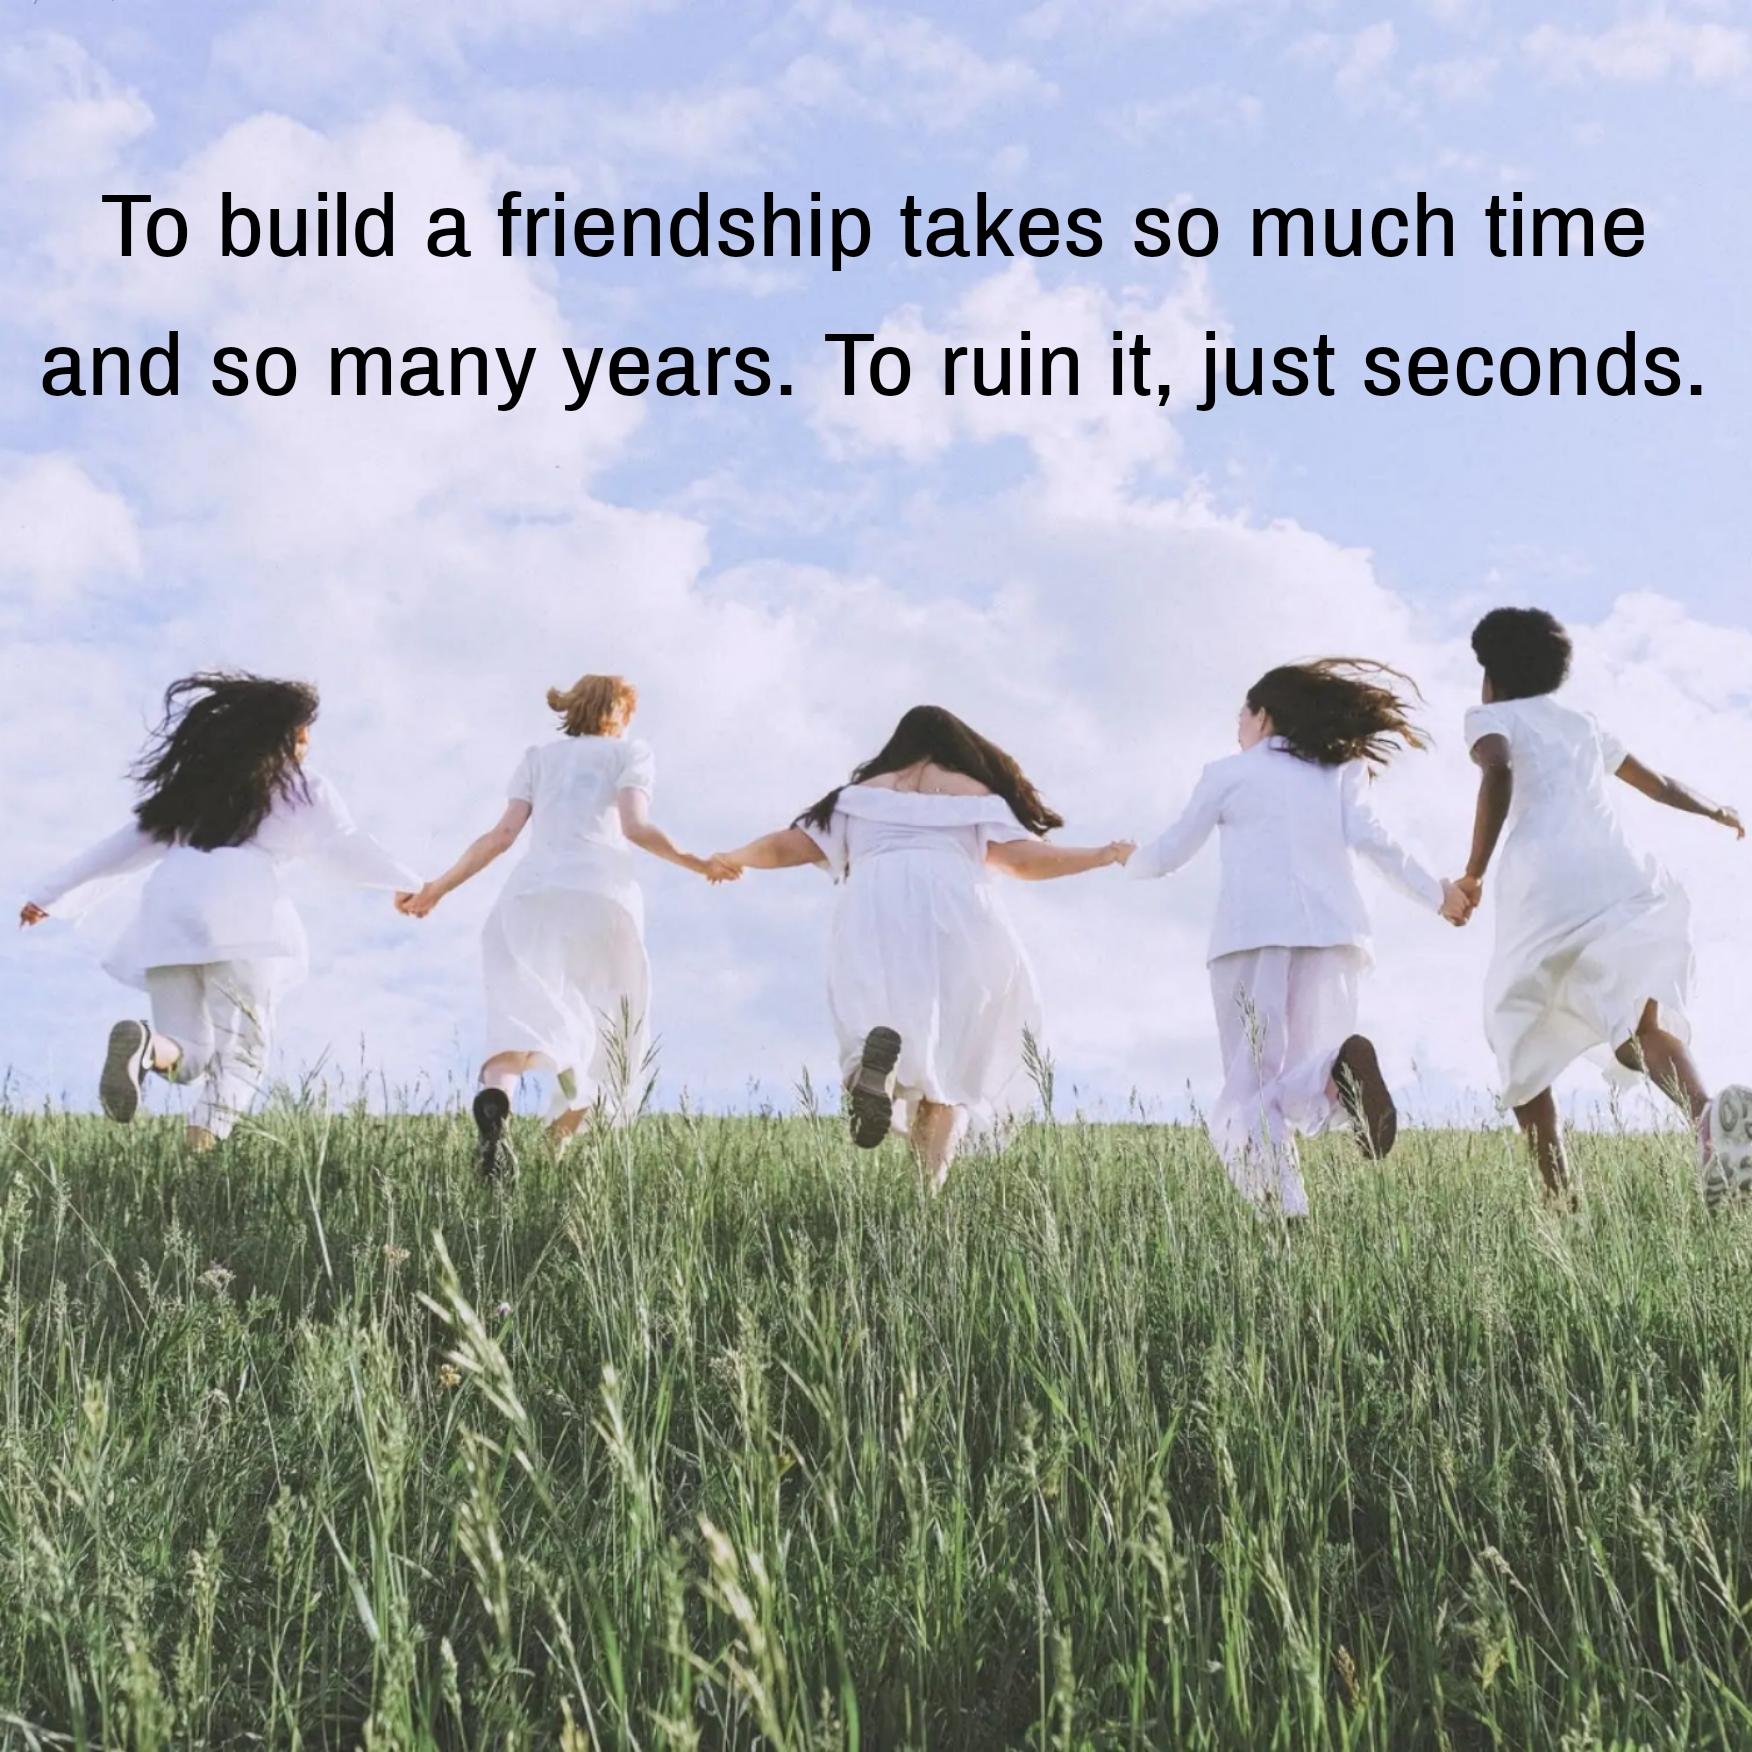 To build a friendship takes so much time and so many years